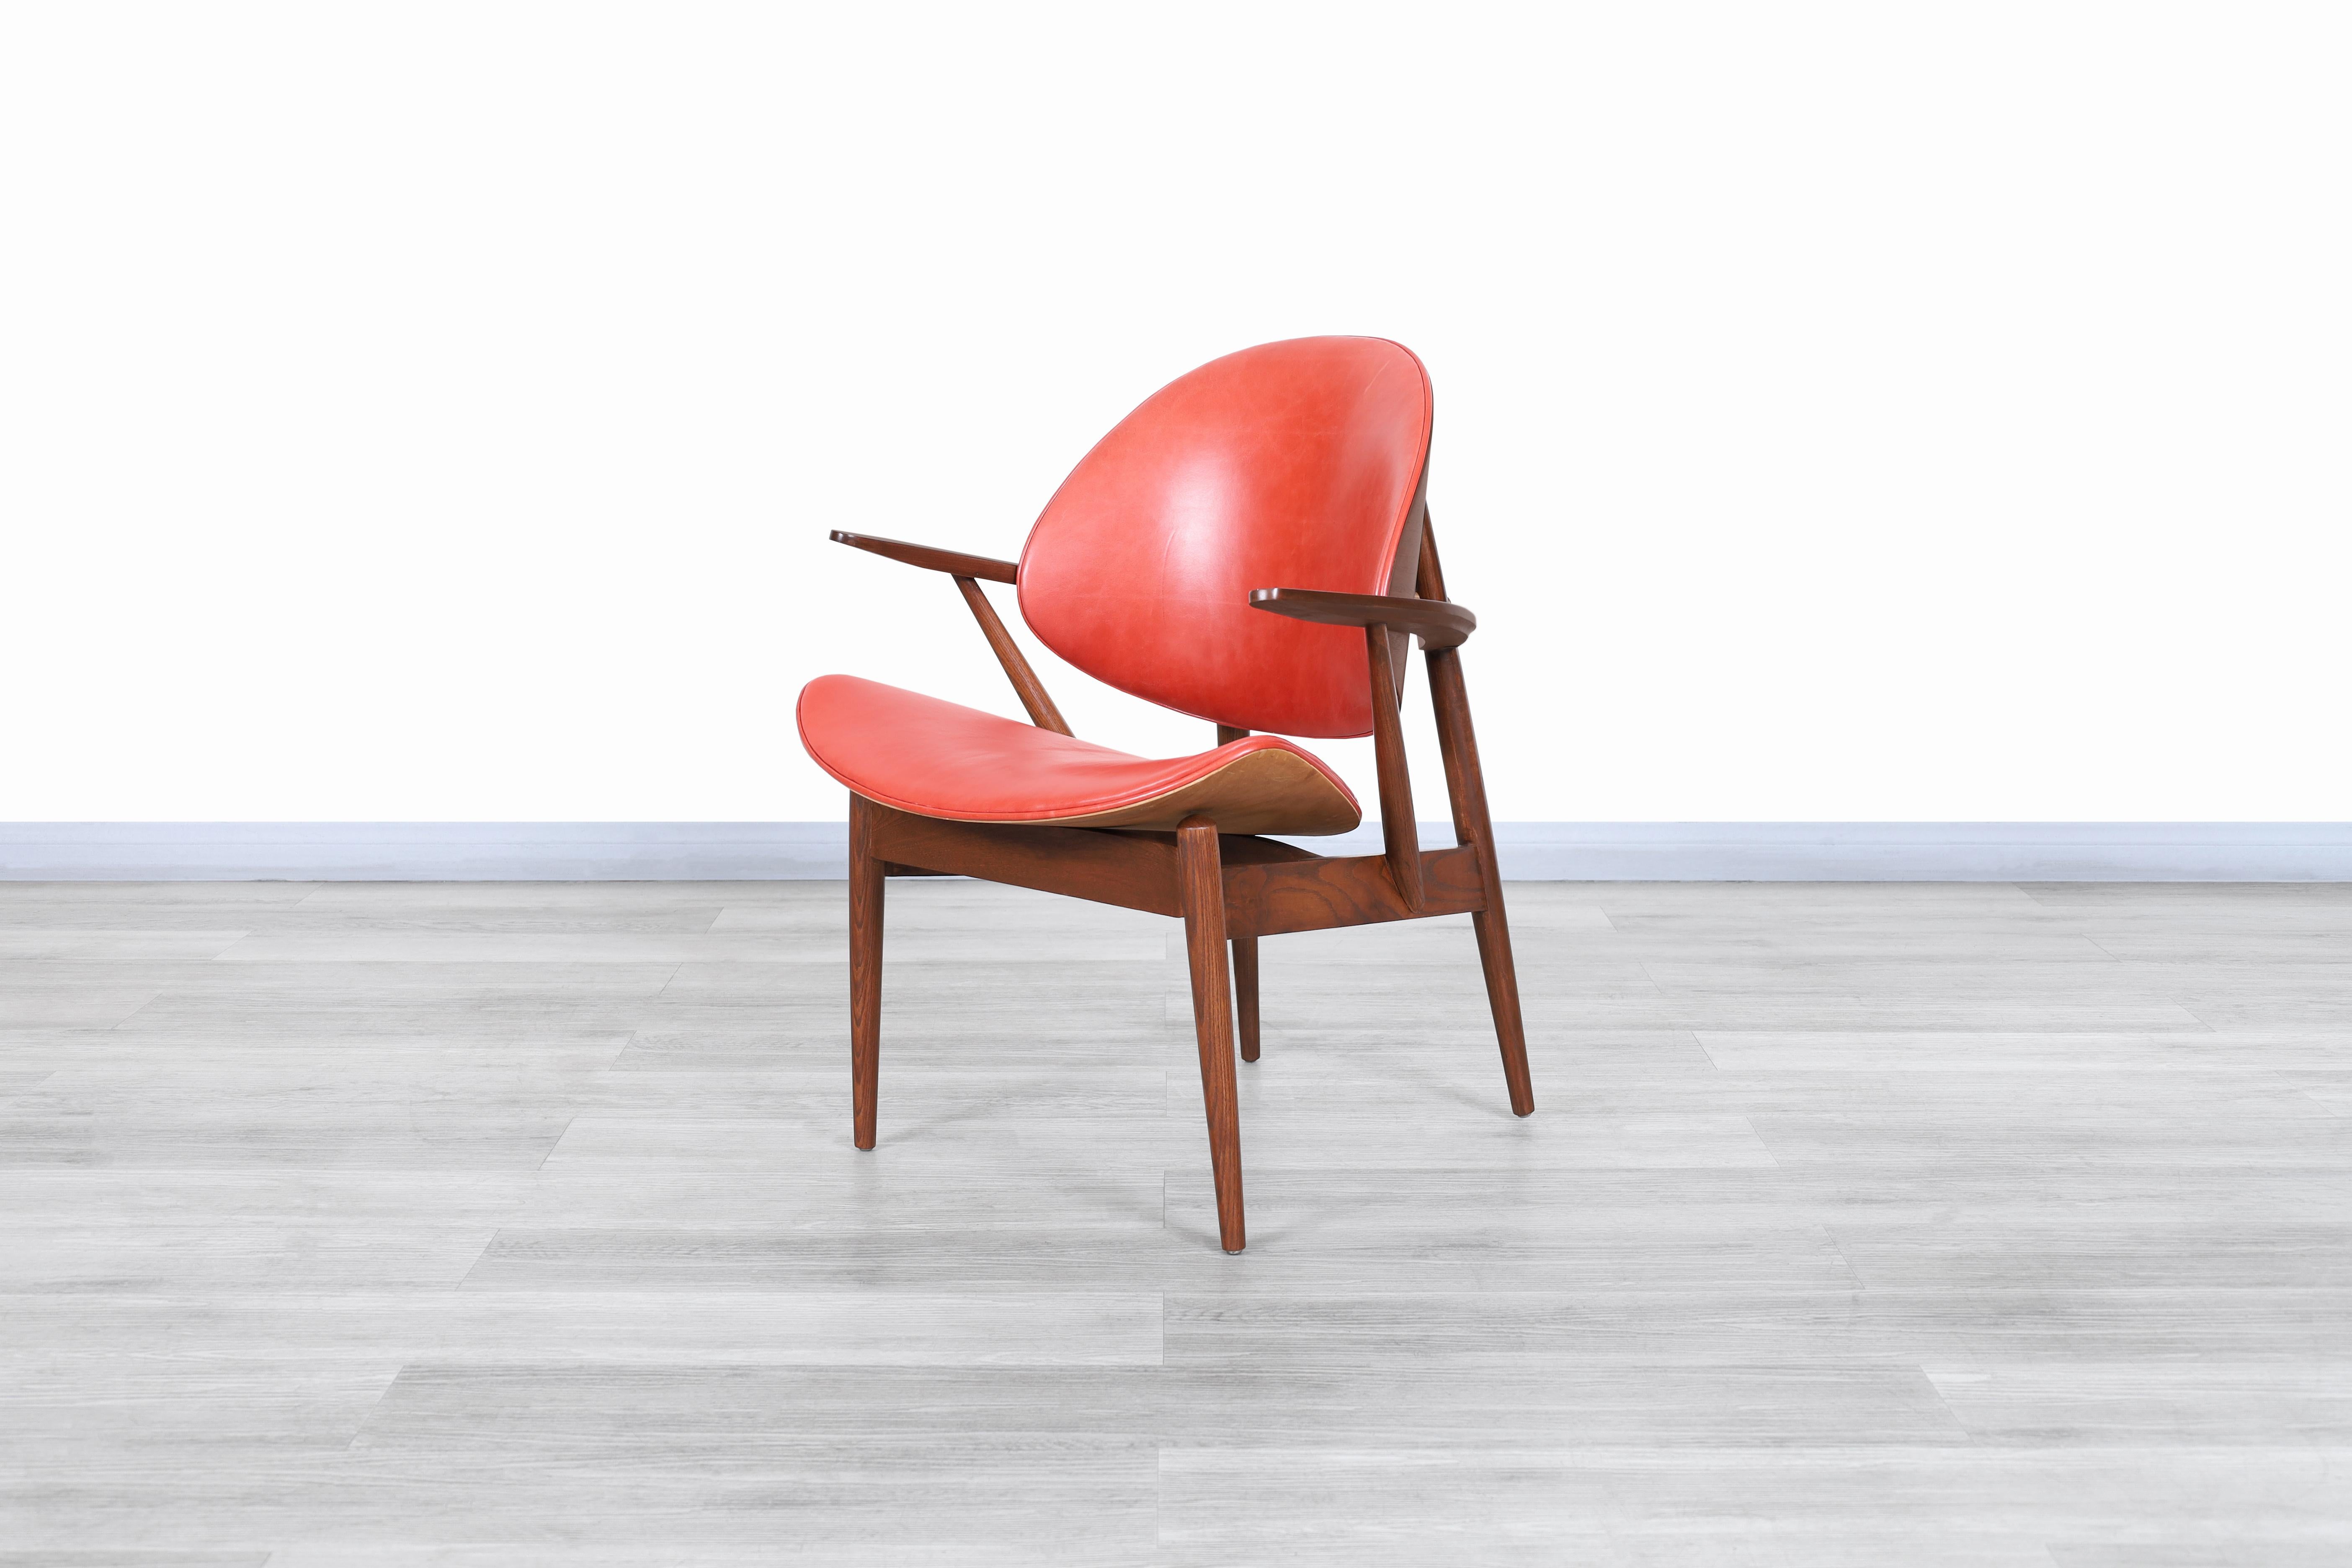 Fabulous vintage leather “Clam Shell” armchair designed by Seymour J. Wiener for Kodawood in the United States, circa 1960s. The chair's structure has been carefully constructed from the highest quality walnut wood, making it even more special as it